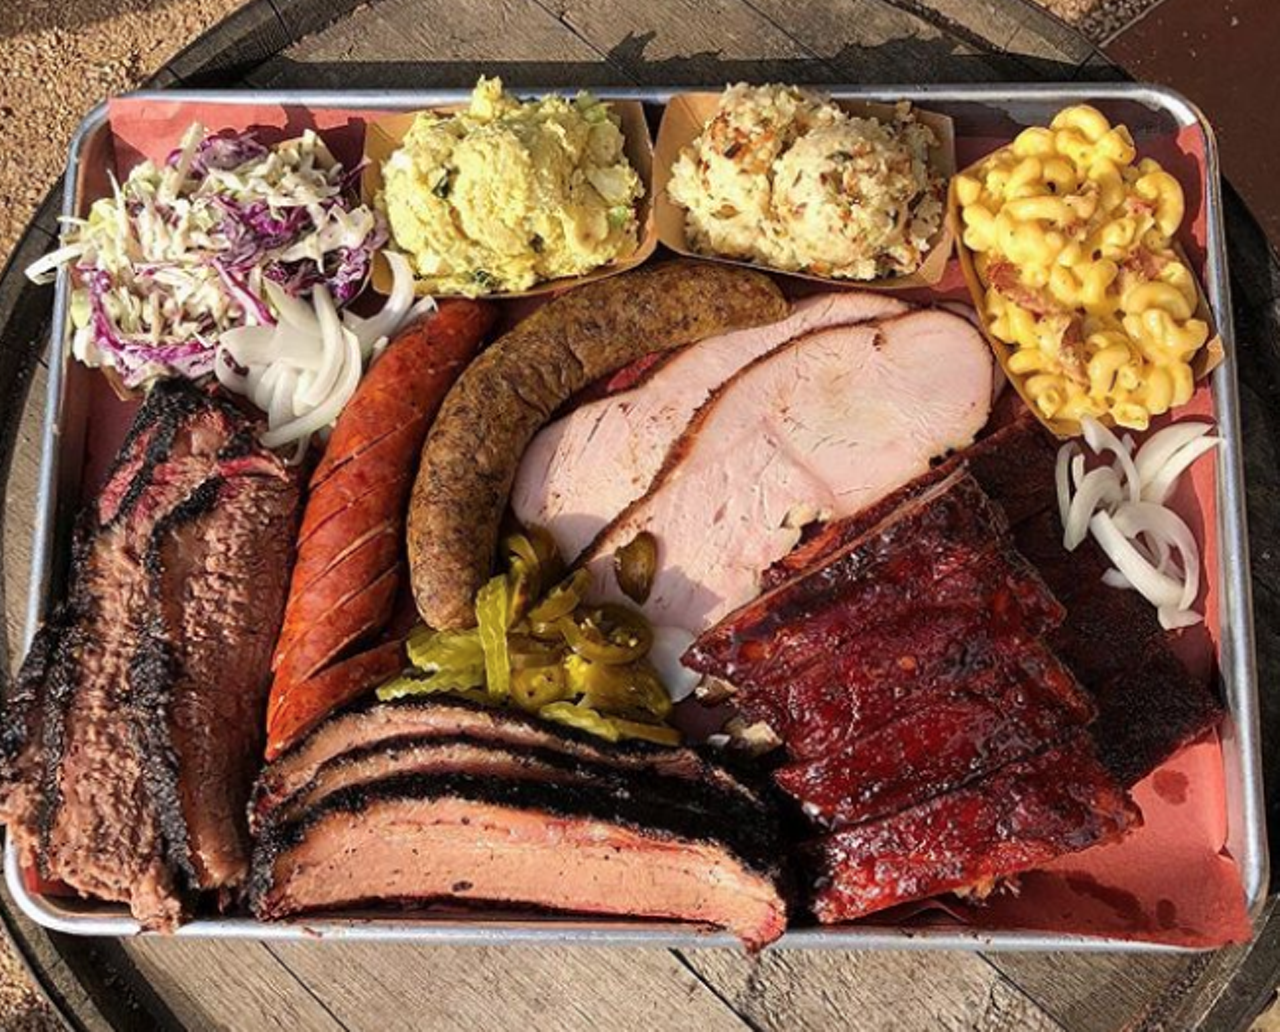 Pinkerton’s BBQ
One of Houston’s most celebrated barbecue spots is expected to open a second location at Weston Urban Park in 2020. Led by Pitmaster Grant Pinkerton, the downtown San Antonio location will offer classic favorites such as brisket, pulled pork and smoked sausage, in addition to Texas craft brews and spirits. 
Photo via Instagram / pinkertonsbbq